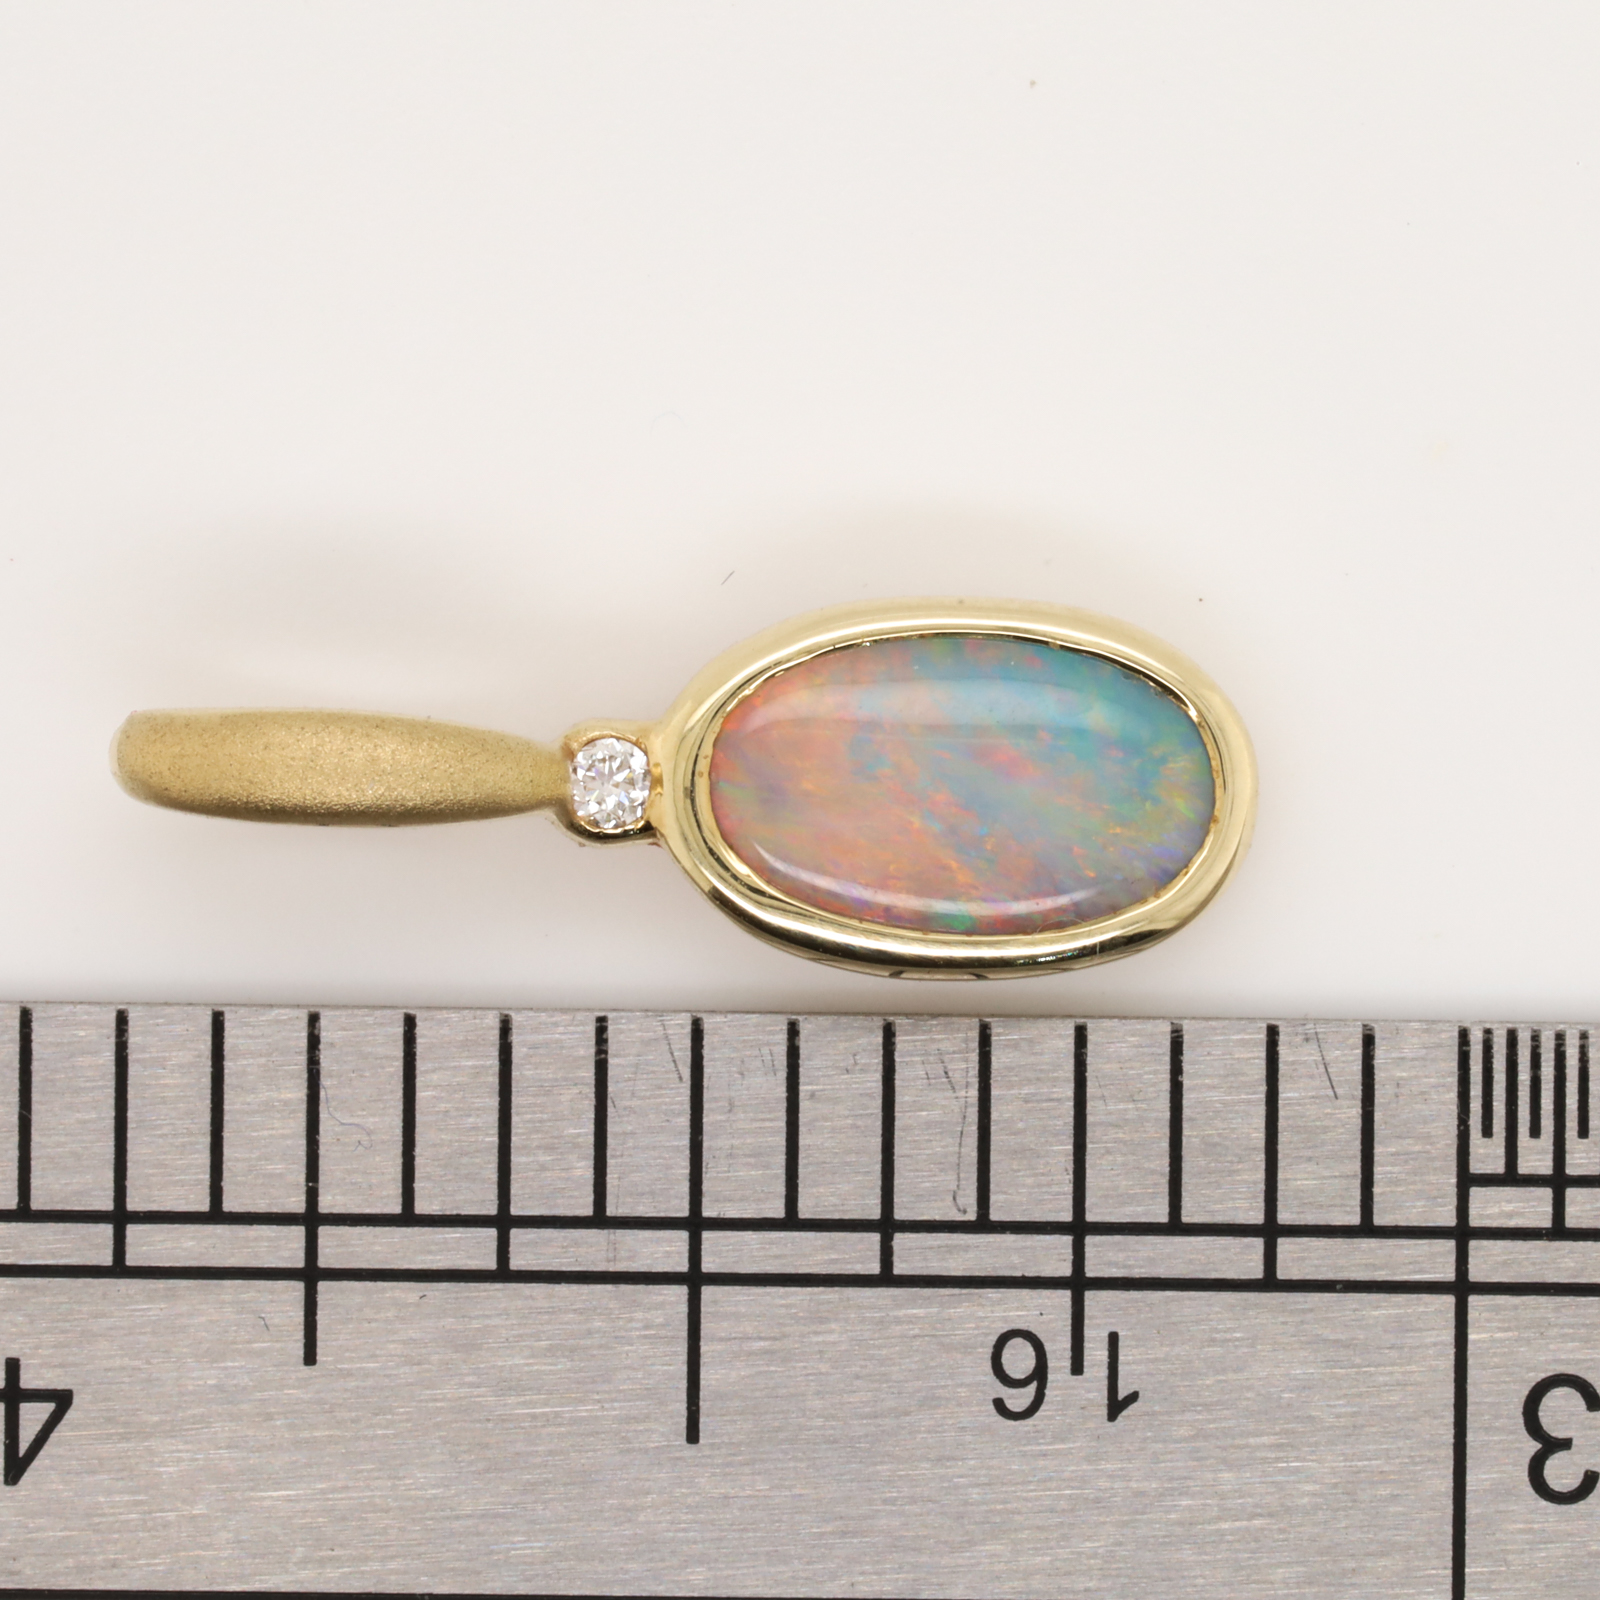 Green Orange and Blue Yellow Gold Solid Australian Semi Black Opal Necklace Pendant with Diamond